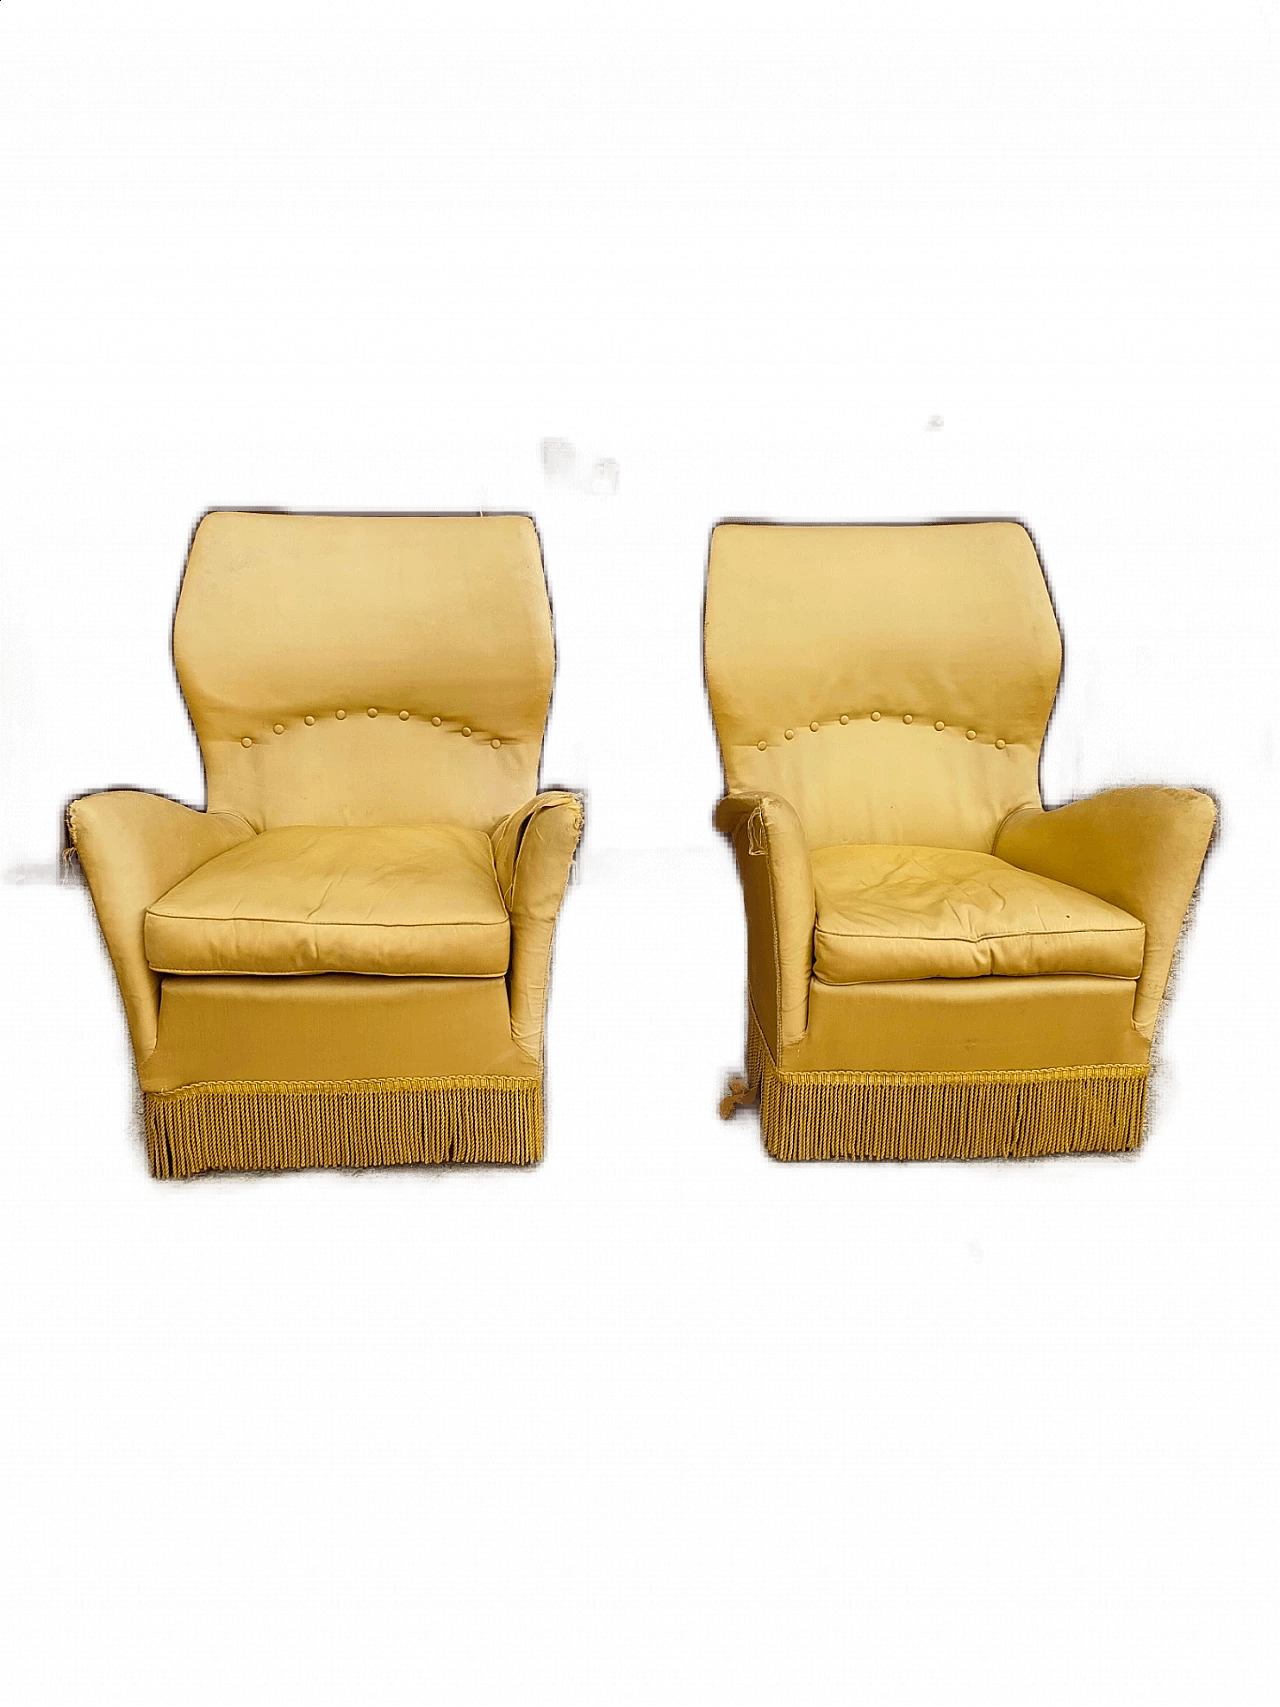 Pair of armchairs attributed to Gio Ponti for Isa Bergamo, 1950s 1304278